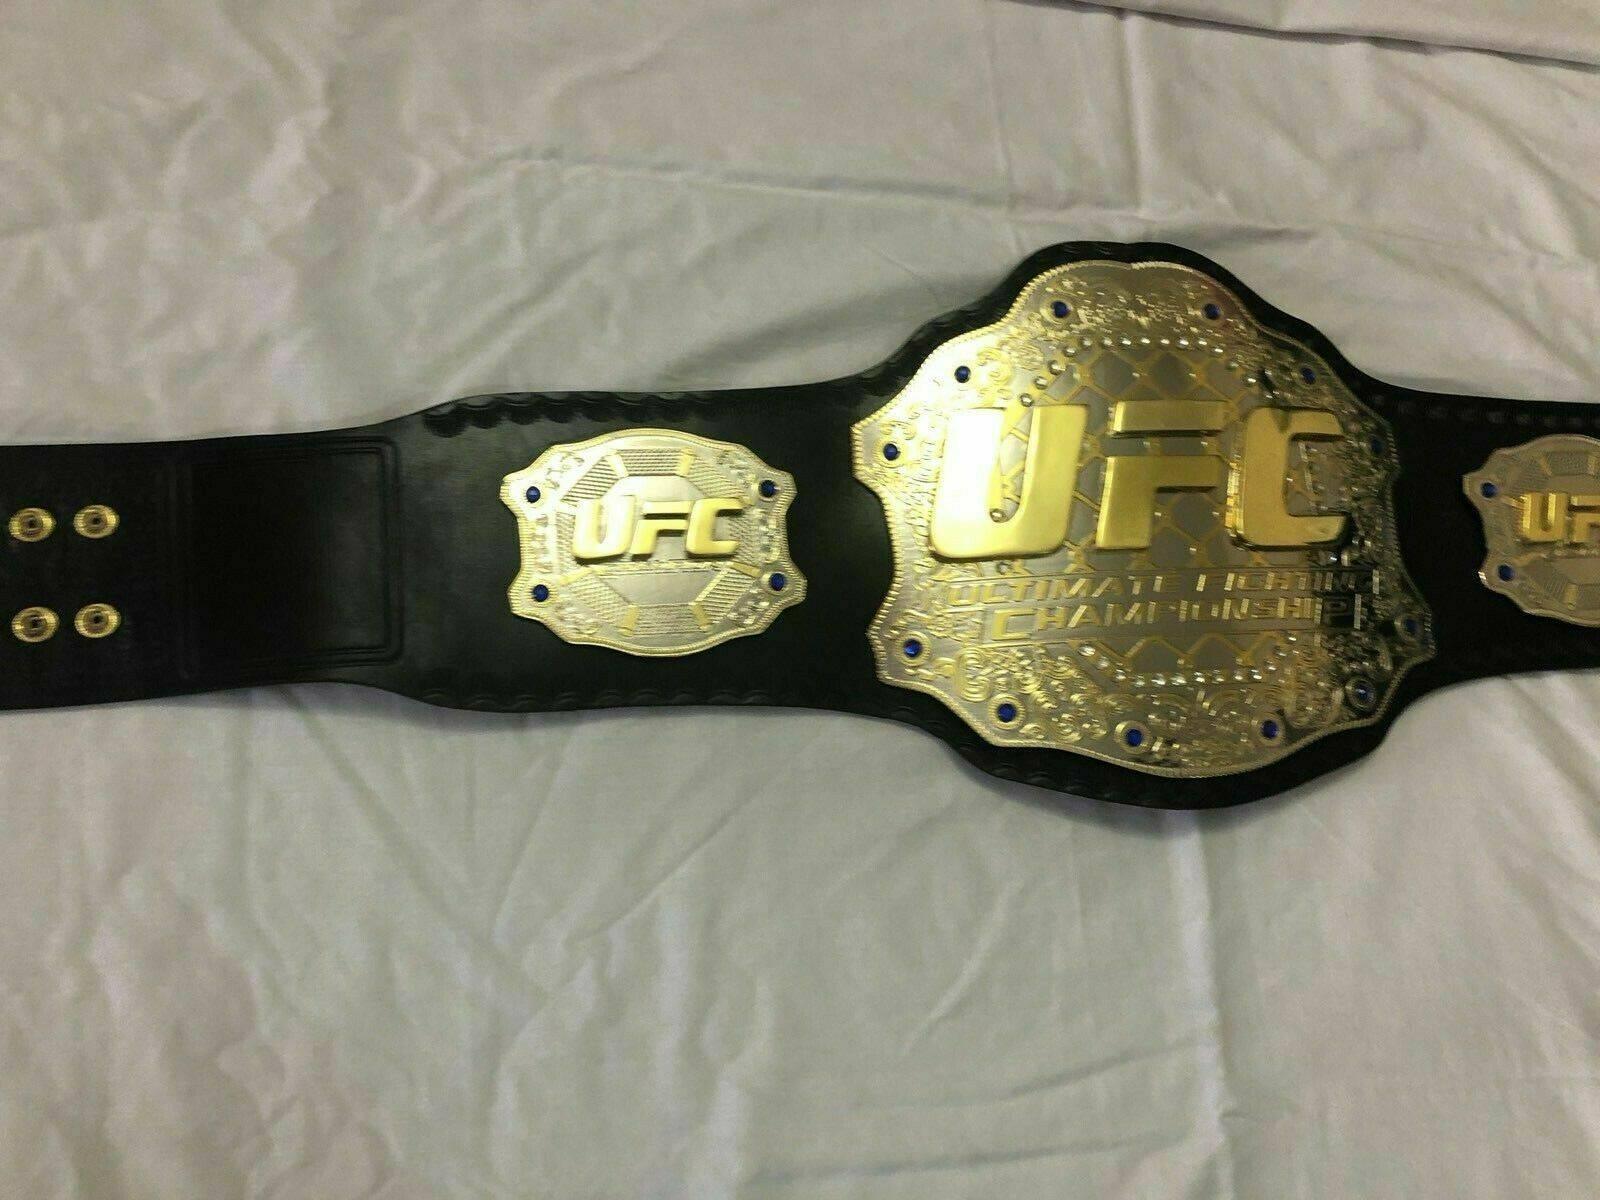 UFC Brass Double Stacked Championship Belt - Zees Belts